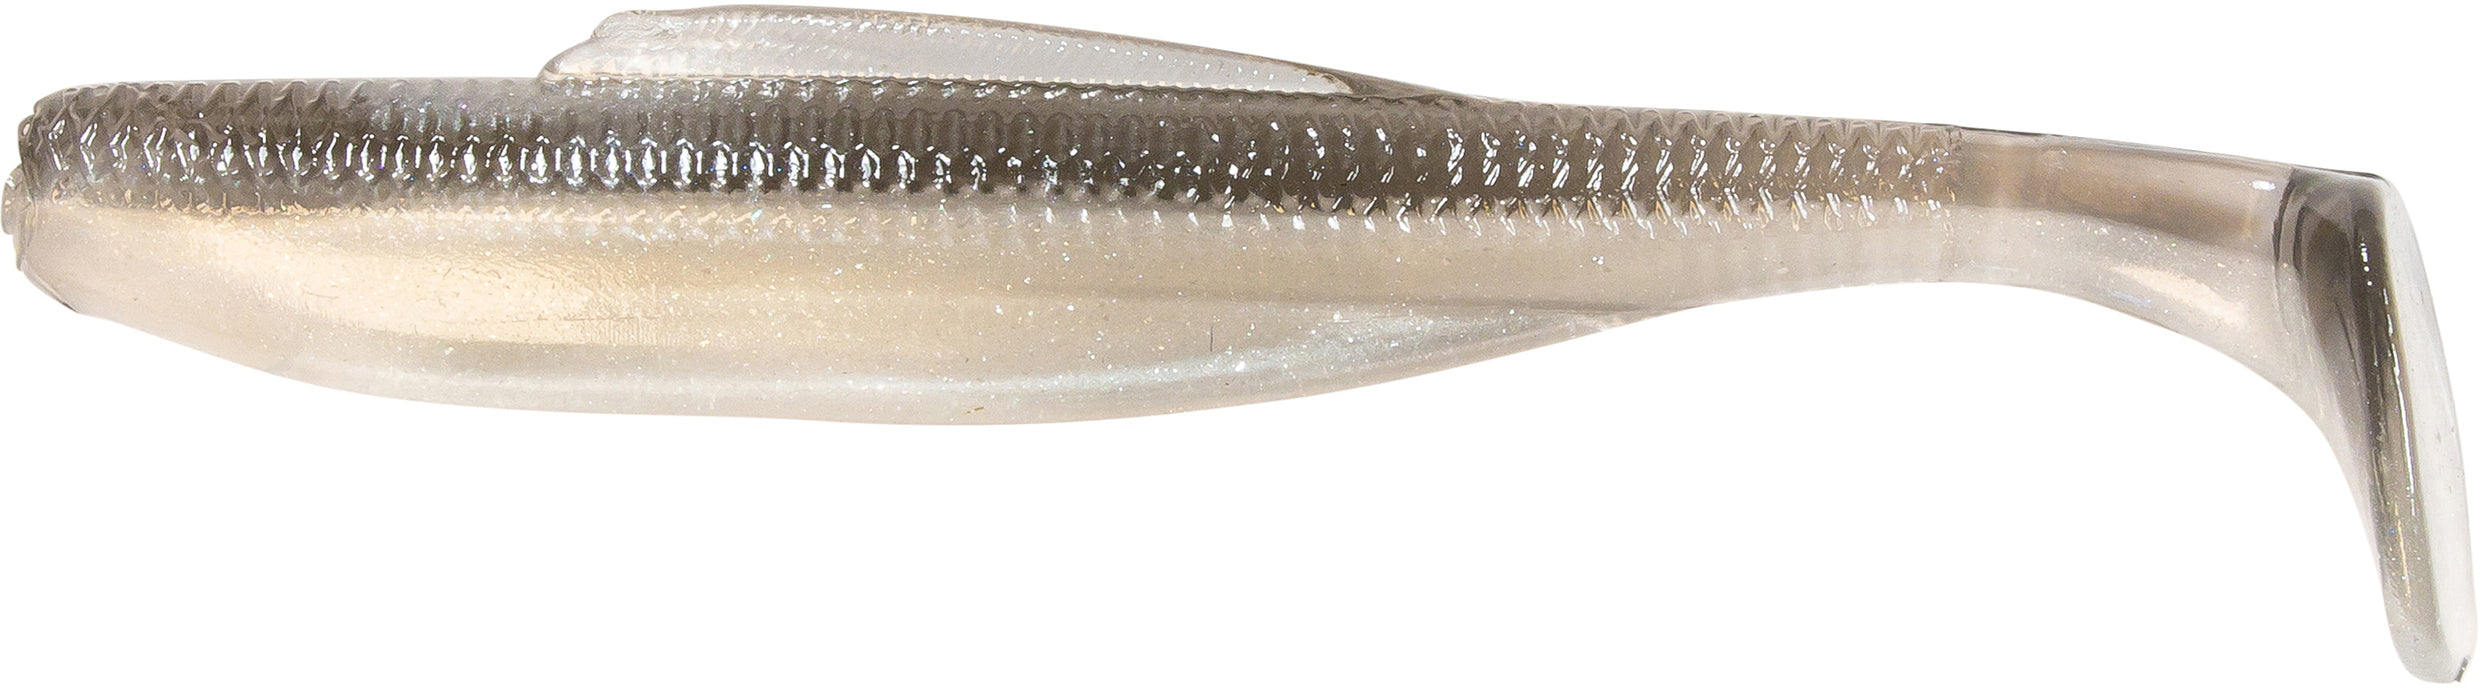 Z-Man DieZel MinnowZ 5 inch Paddle Tail Swimbait 4 pack — Discount Tackle